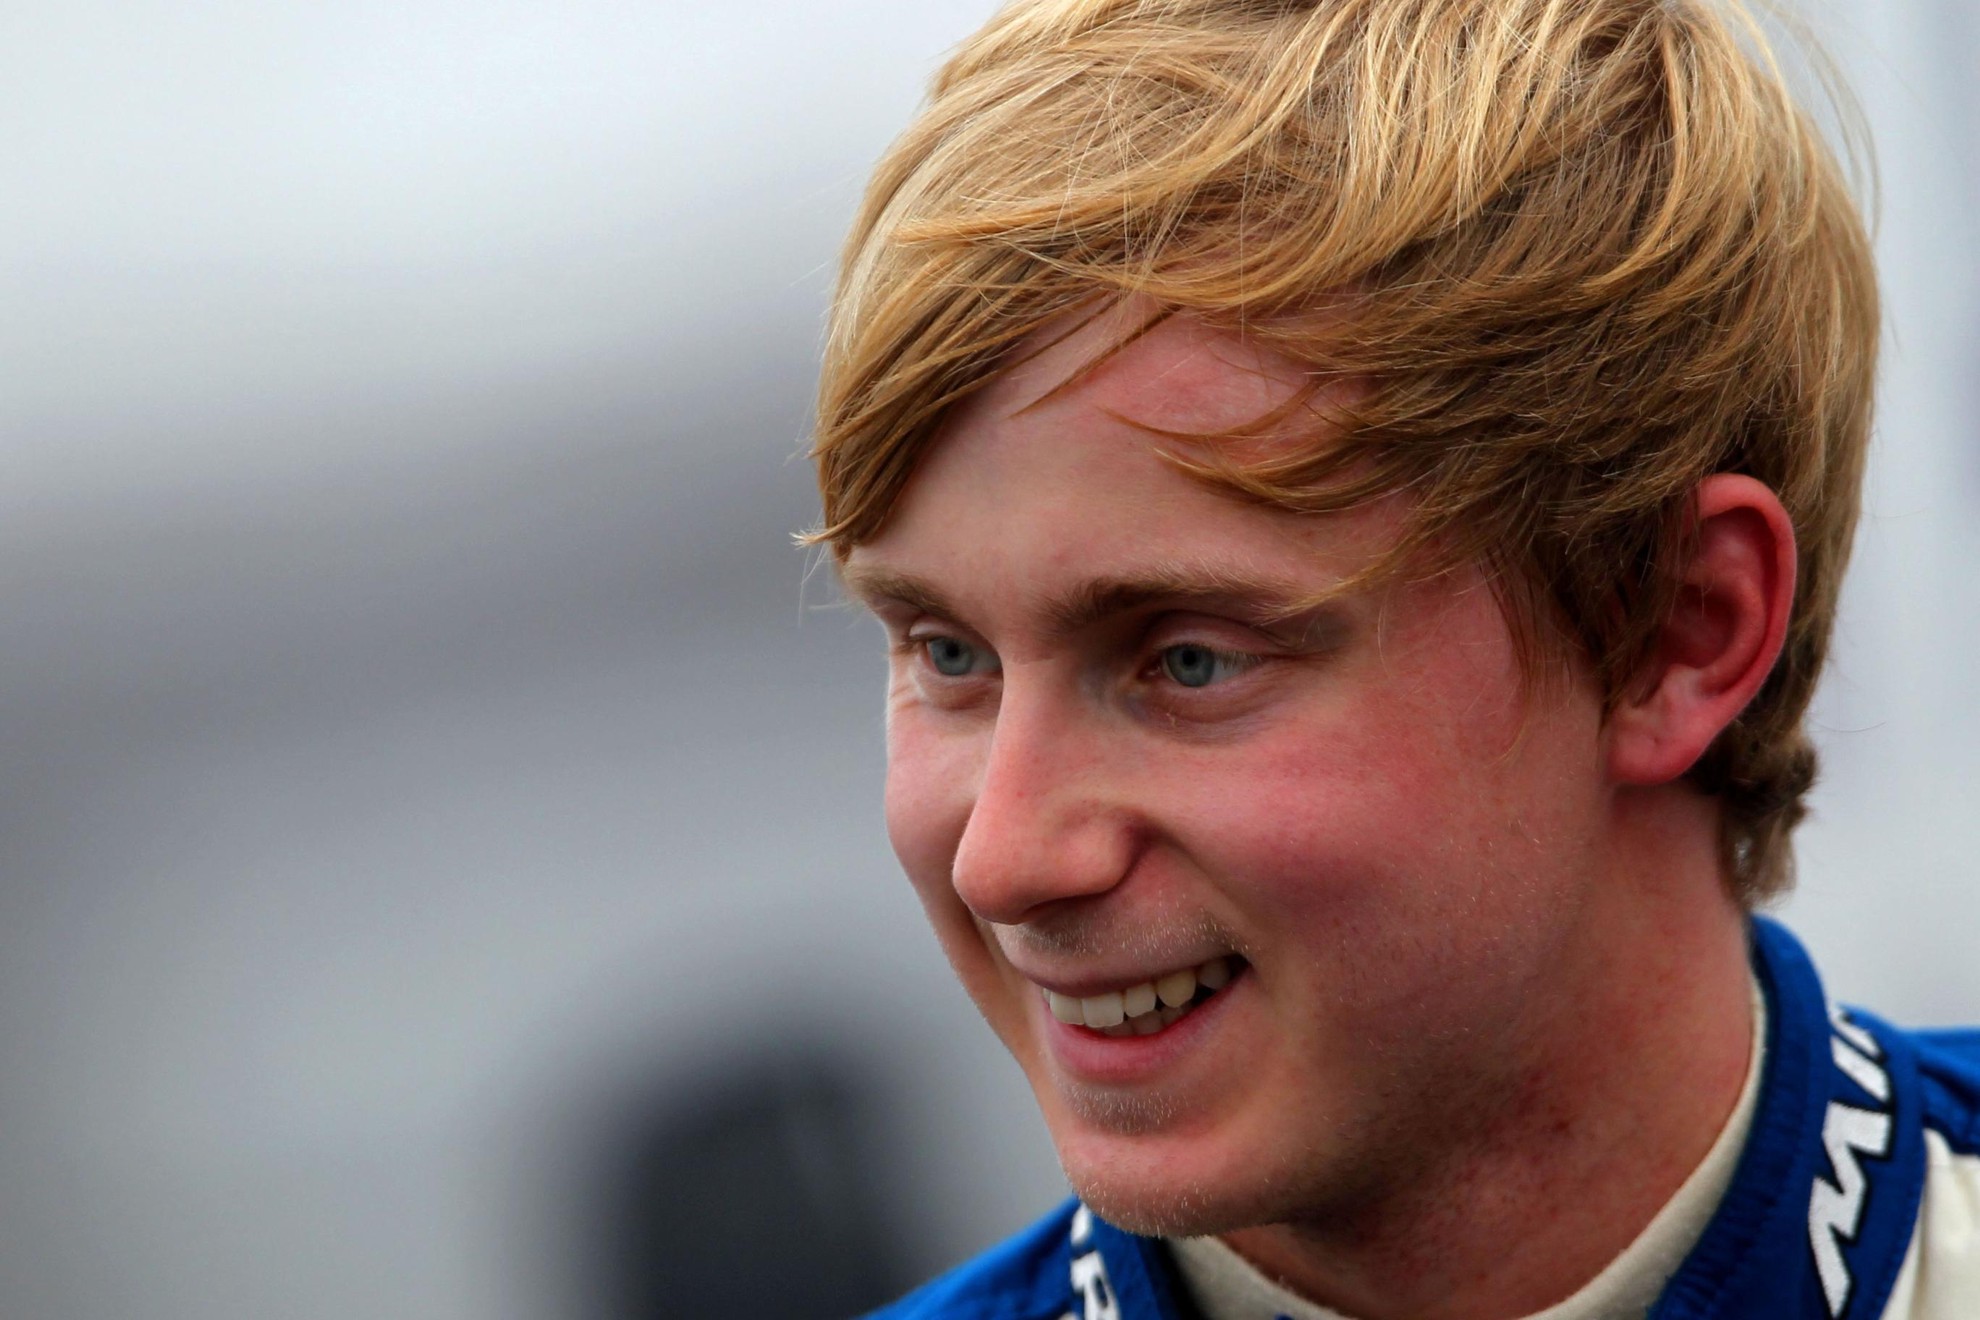 RISING STAR ASHLEY SUTTON JOINS 2015 CLIO CUP GRID WITH TOURING CAR TEAM BMR